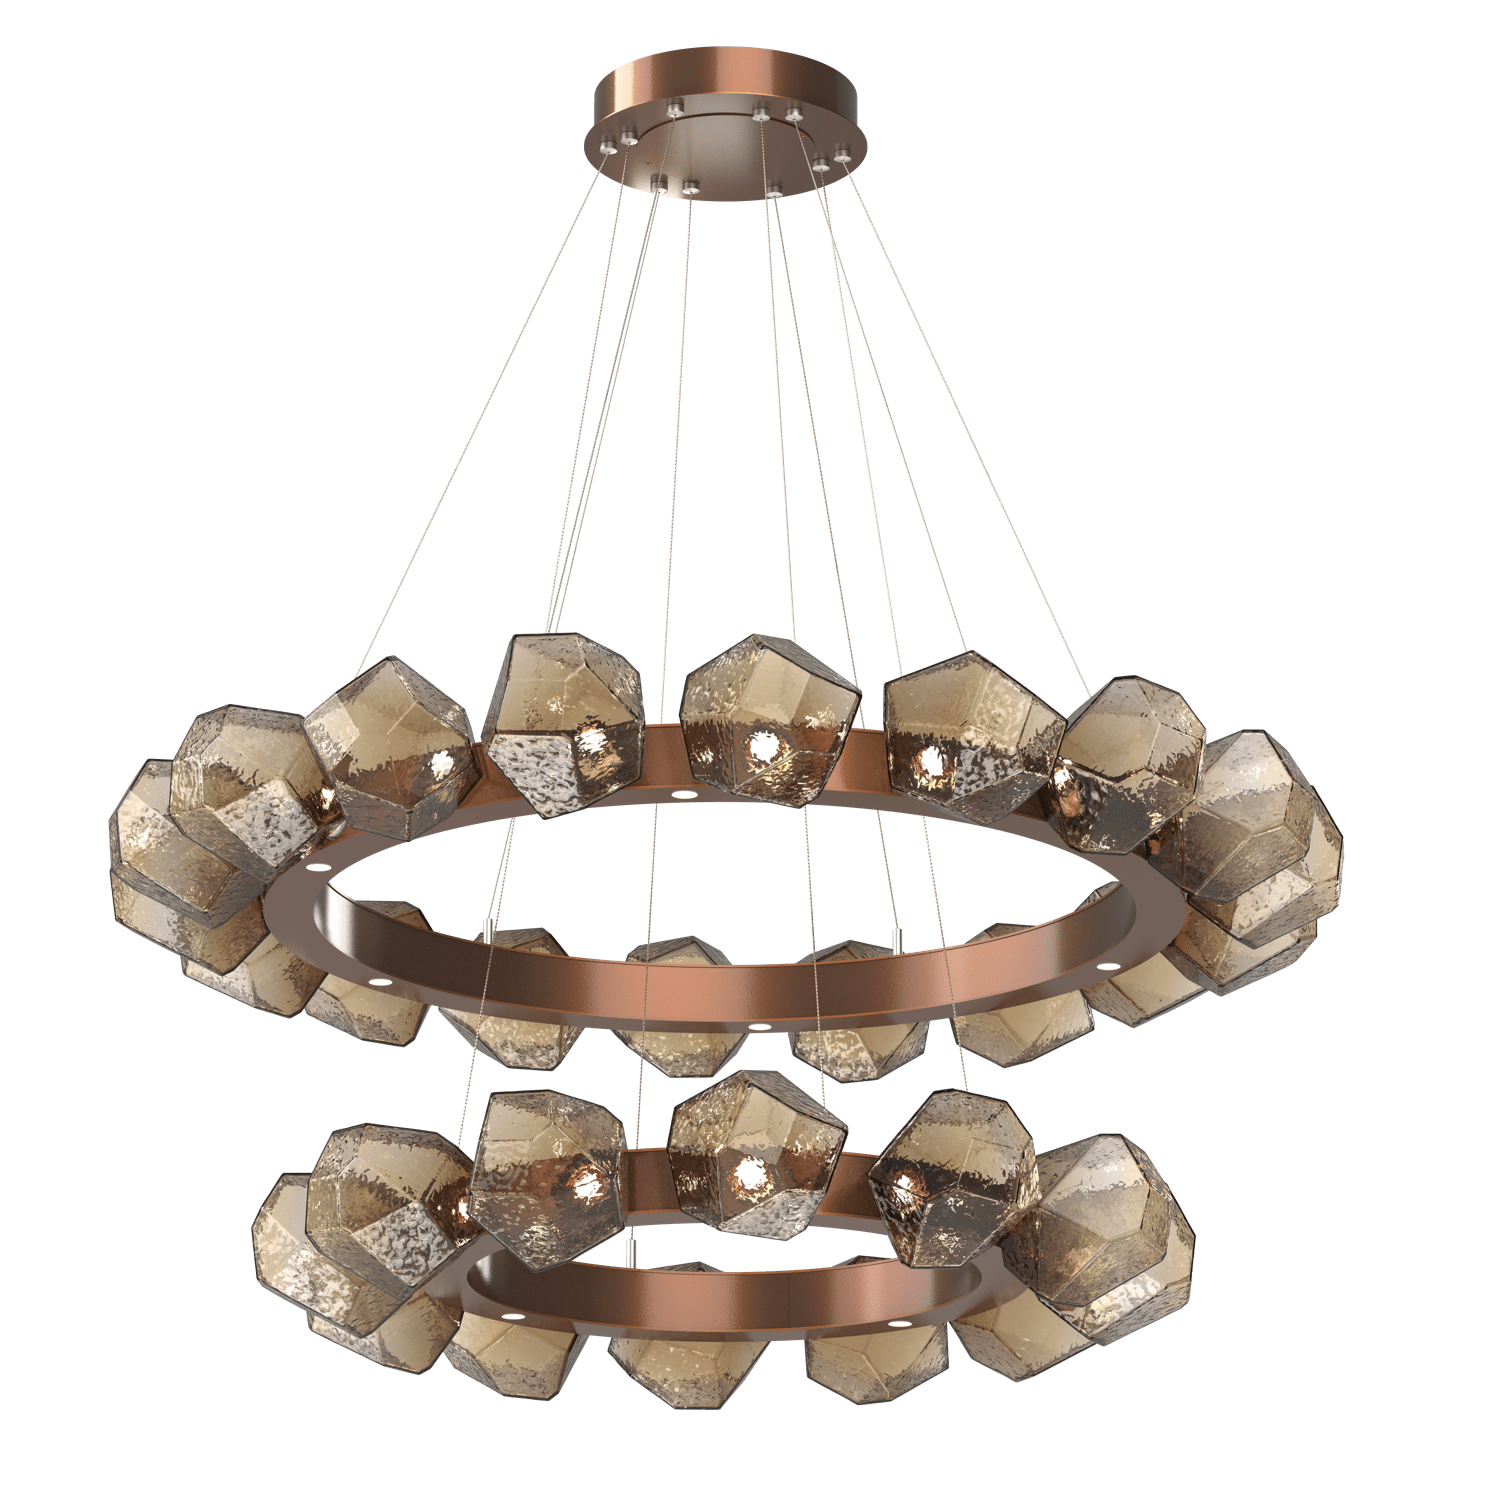 CHB0039-2T-BB-B-Hammerton-Studio-Gem-48-inch-two-tier-radial-ring-chandelier-with-burnished-bronze-finish-and-bronze-blown-glass-shades-and-LED-lamping